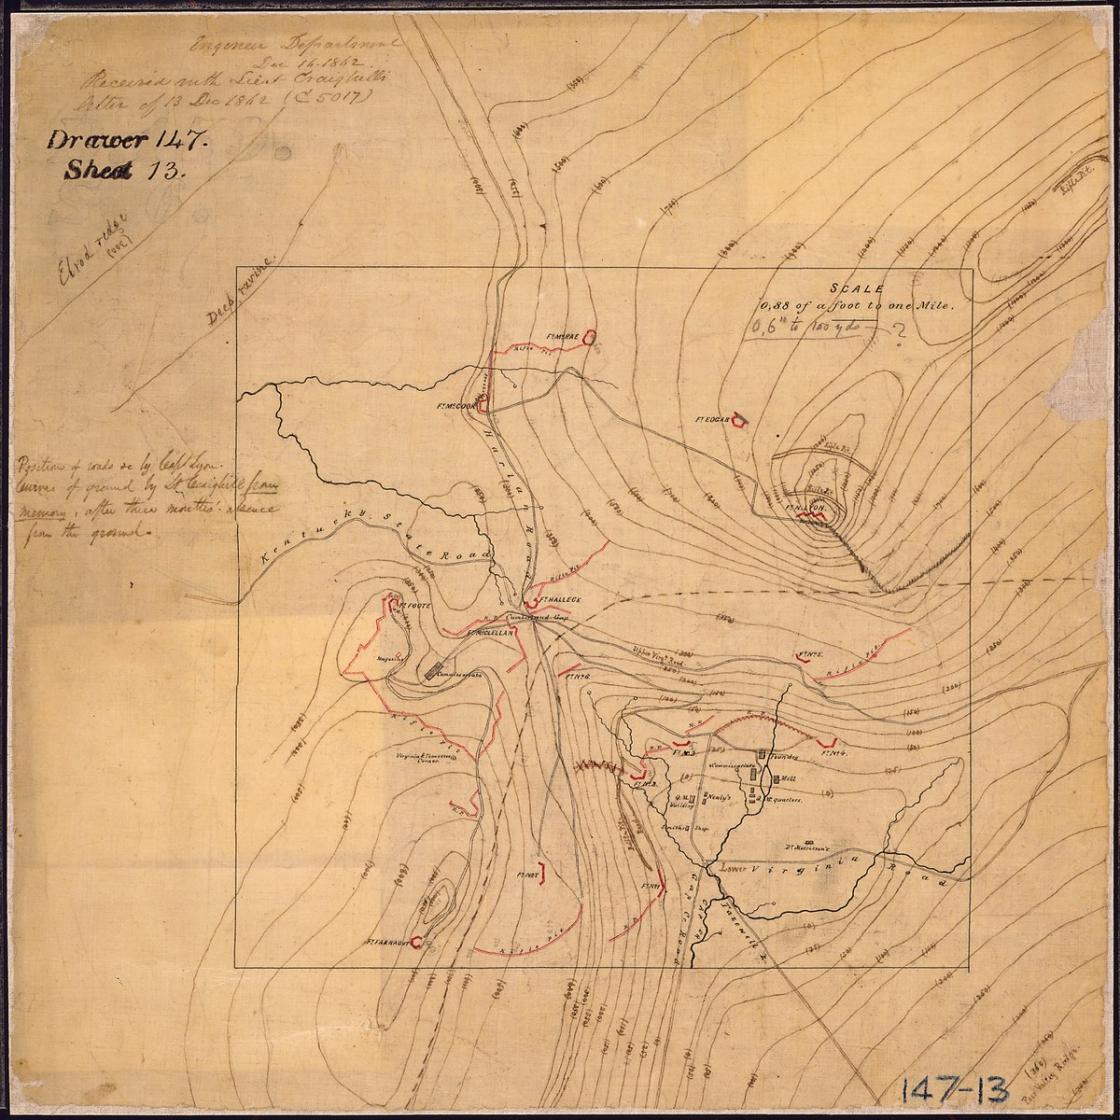 Shows the Confederate fortifications at Cumberland Gap in 1862-1863 